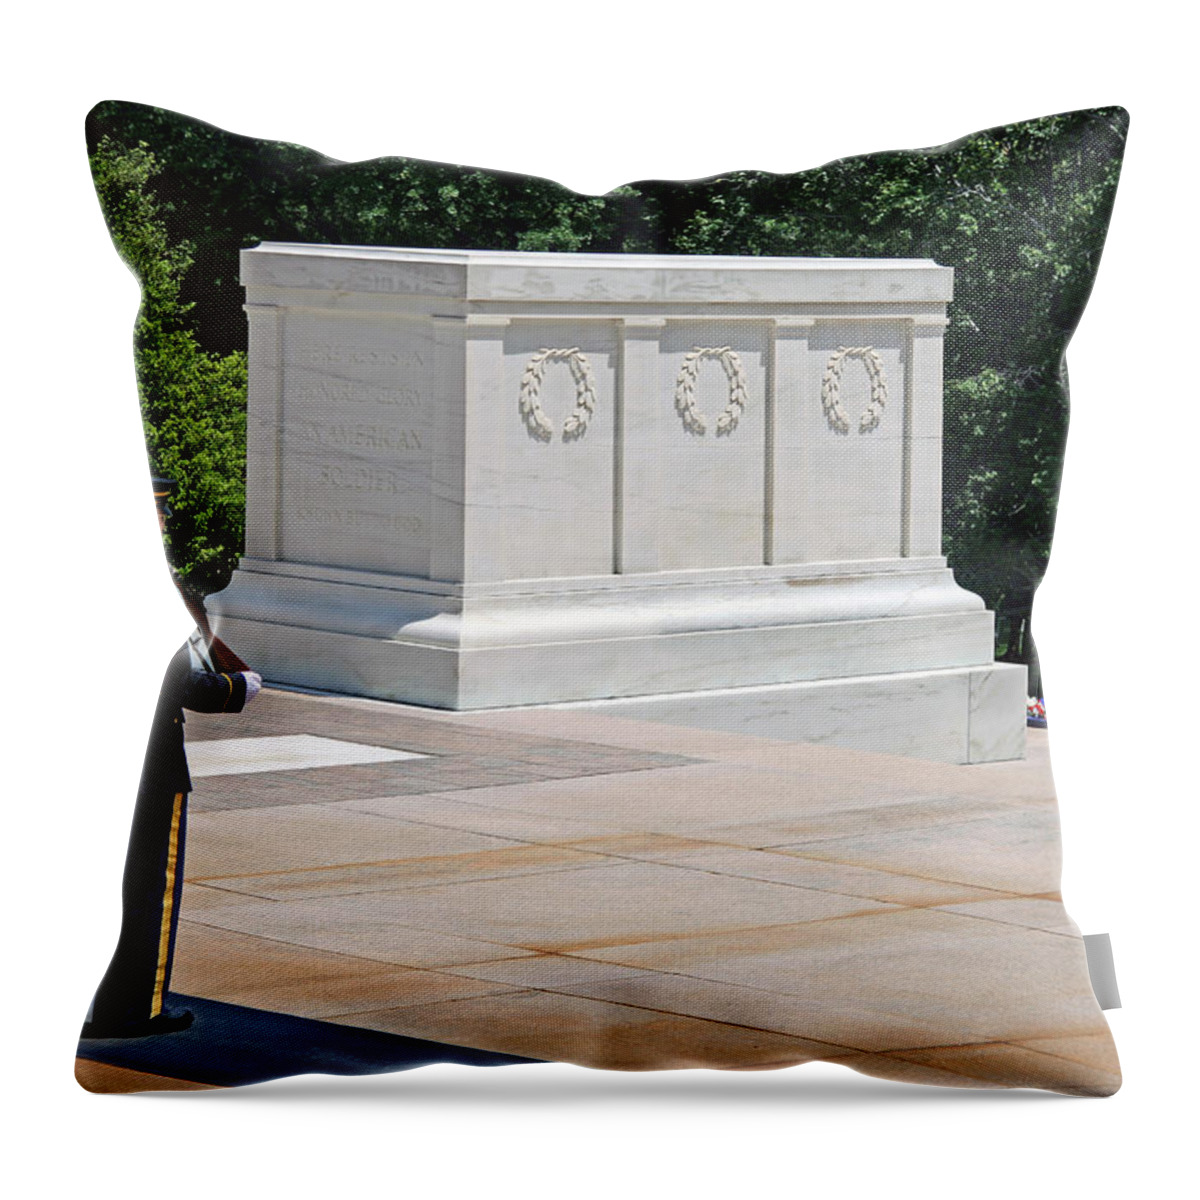 Tomb Throw Pillow featuring the photograph Guarding The Tomb by Cora Wandel